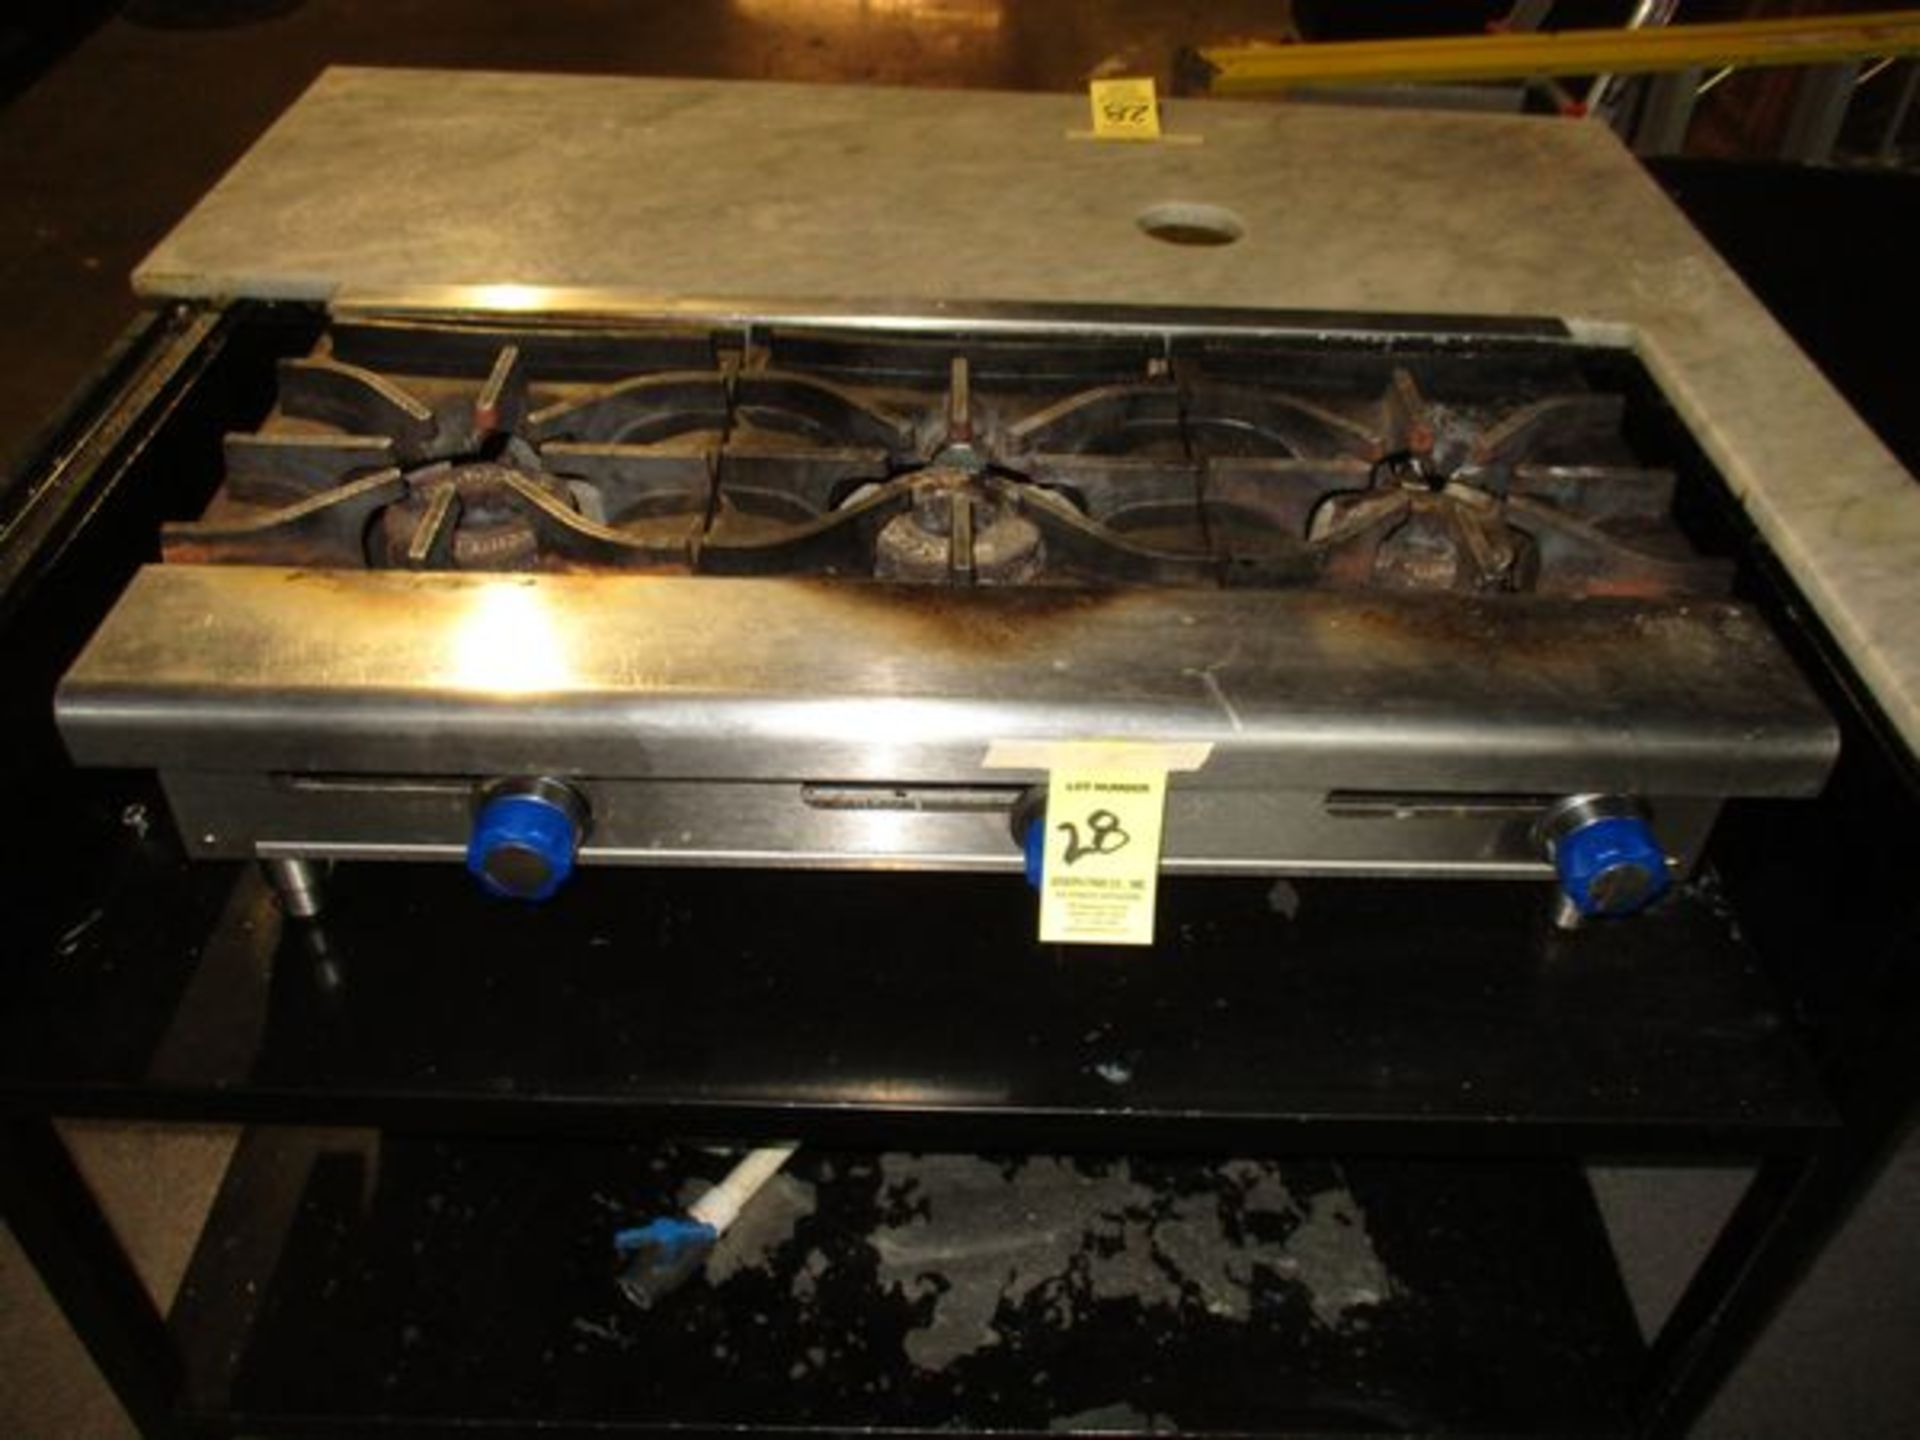 Imperial 3-Burner Insert w/Metal Frame, Marble Top (Asset Located in Brighton, MA) - Image 2 of 2